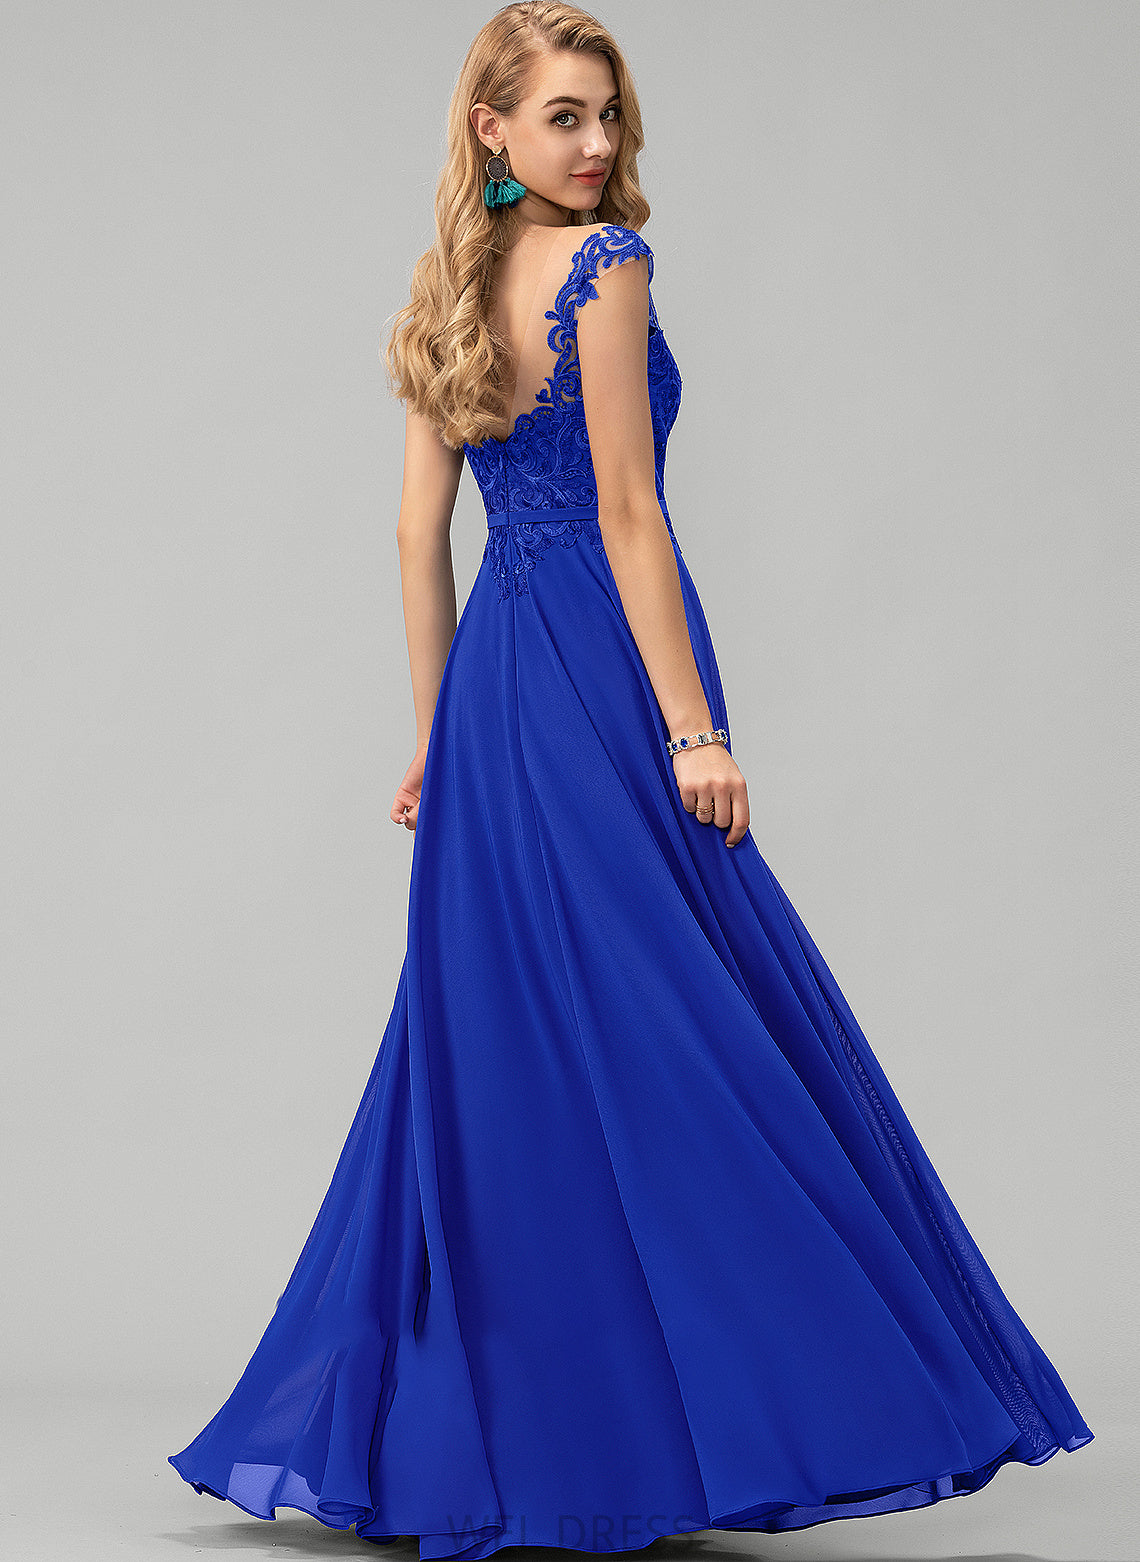 Chiffon Prom Dresses Neck Iyana Scoop Lace A-Line Floor-Length Sequins With